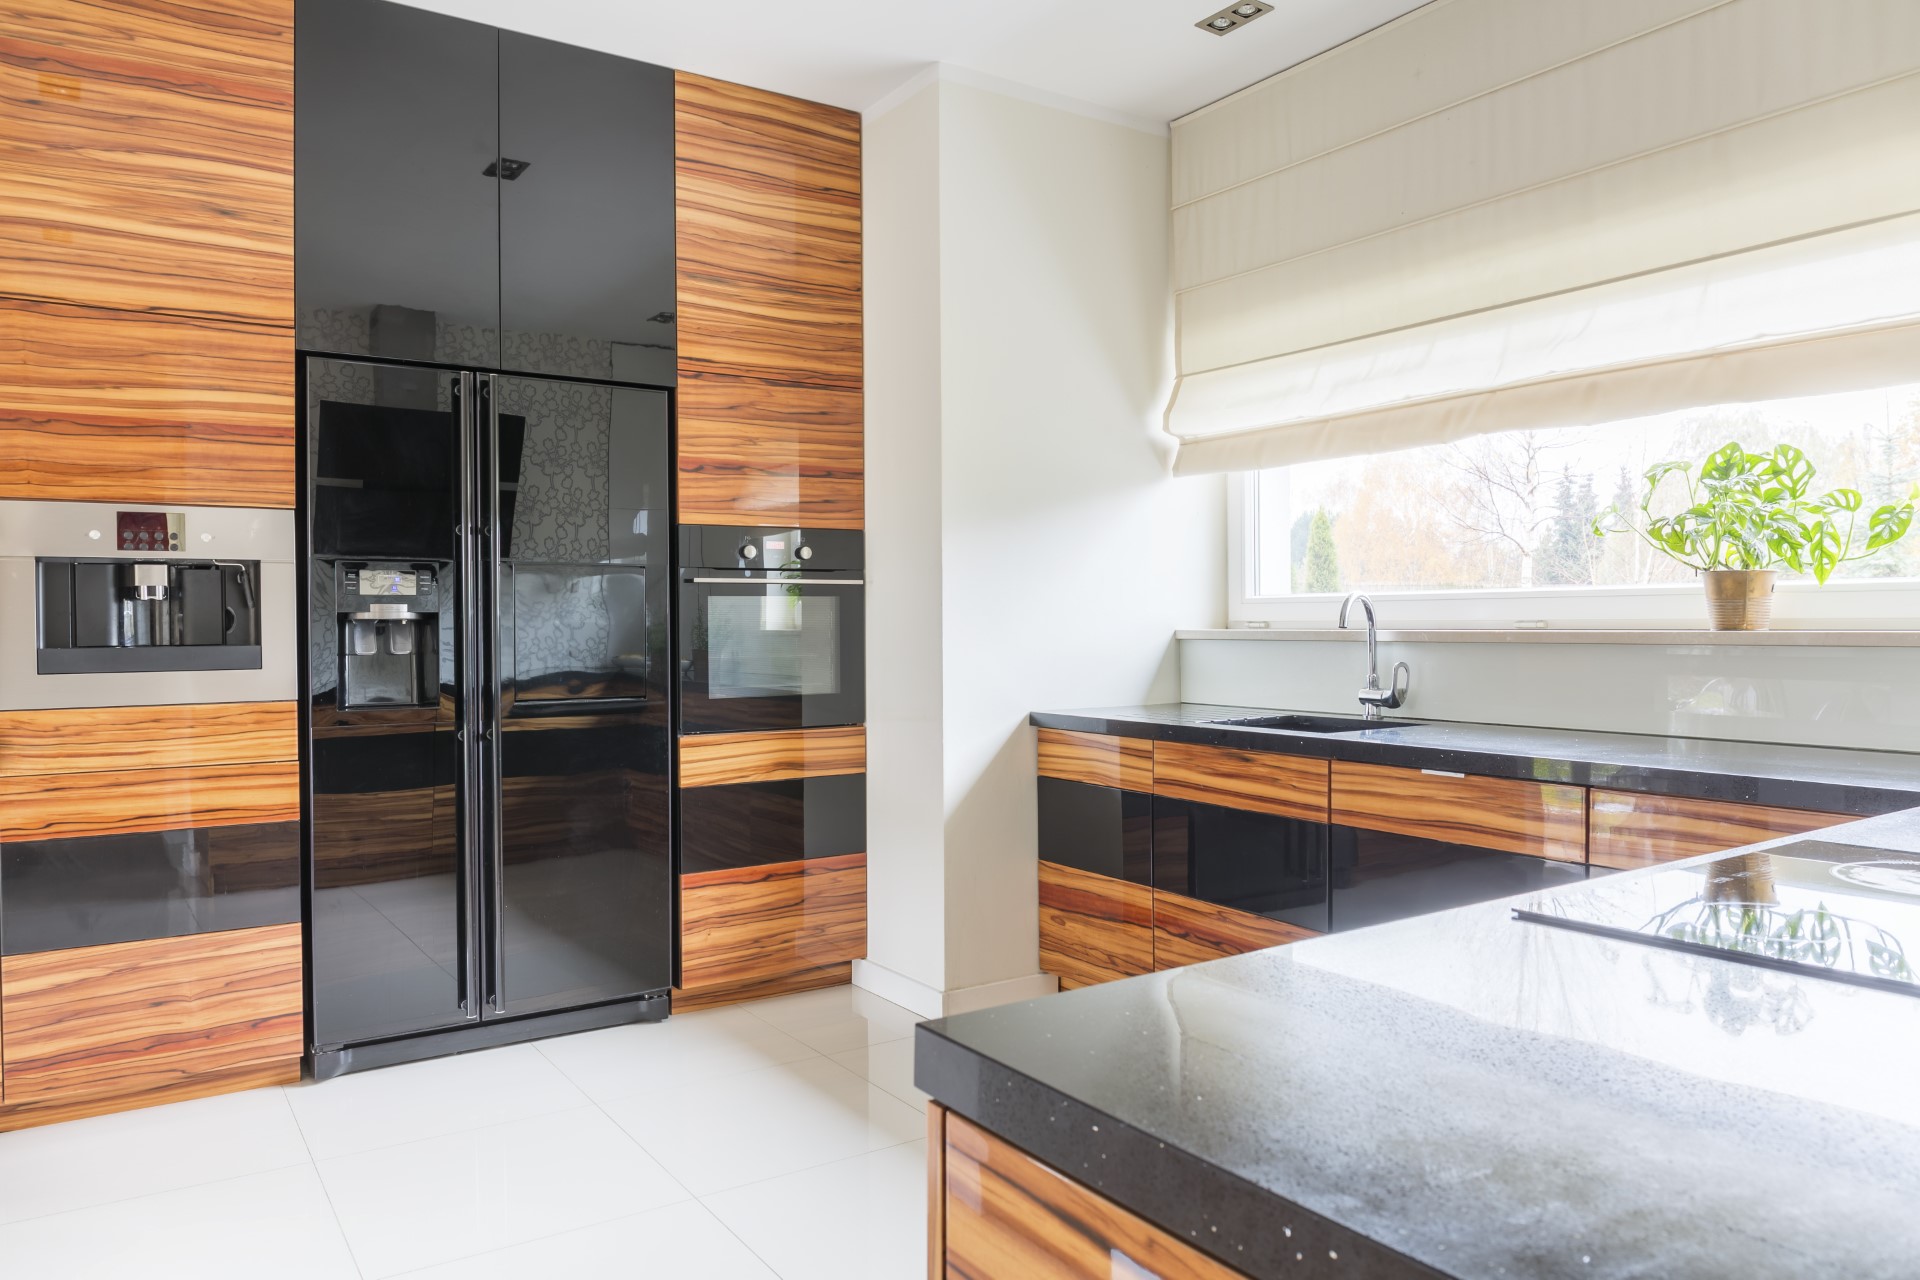 Nothing displays elegance quite like out of the ordinary in this burned stained wood theme. This kitchen emphasizes on the glossy ebony tones that help bring out the fine grain in the burnt wood cabinets. This high level gloss is not the cheapest style, but it gives that surreal, abstract, nature type of feel.